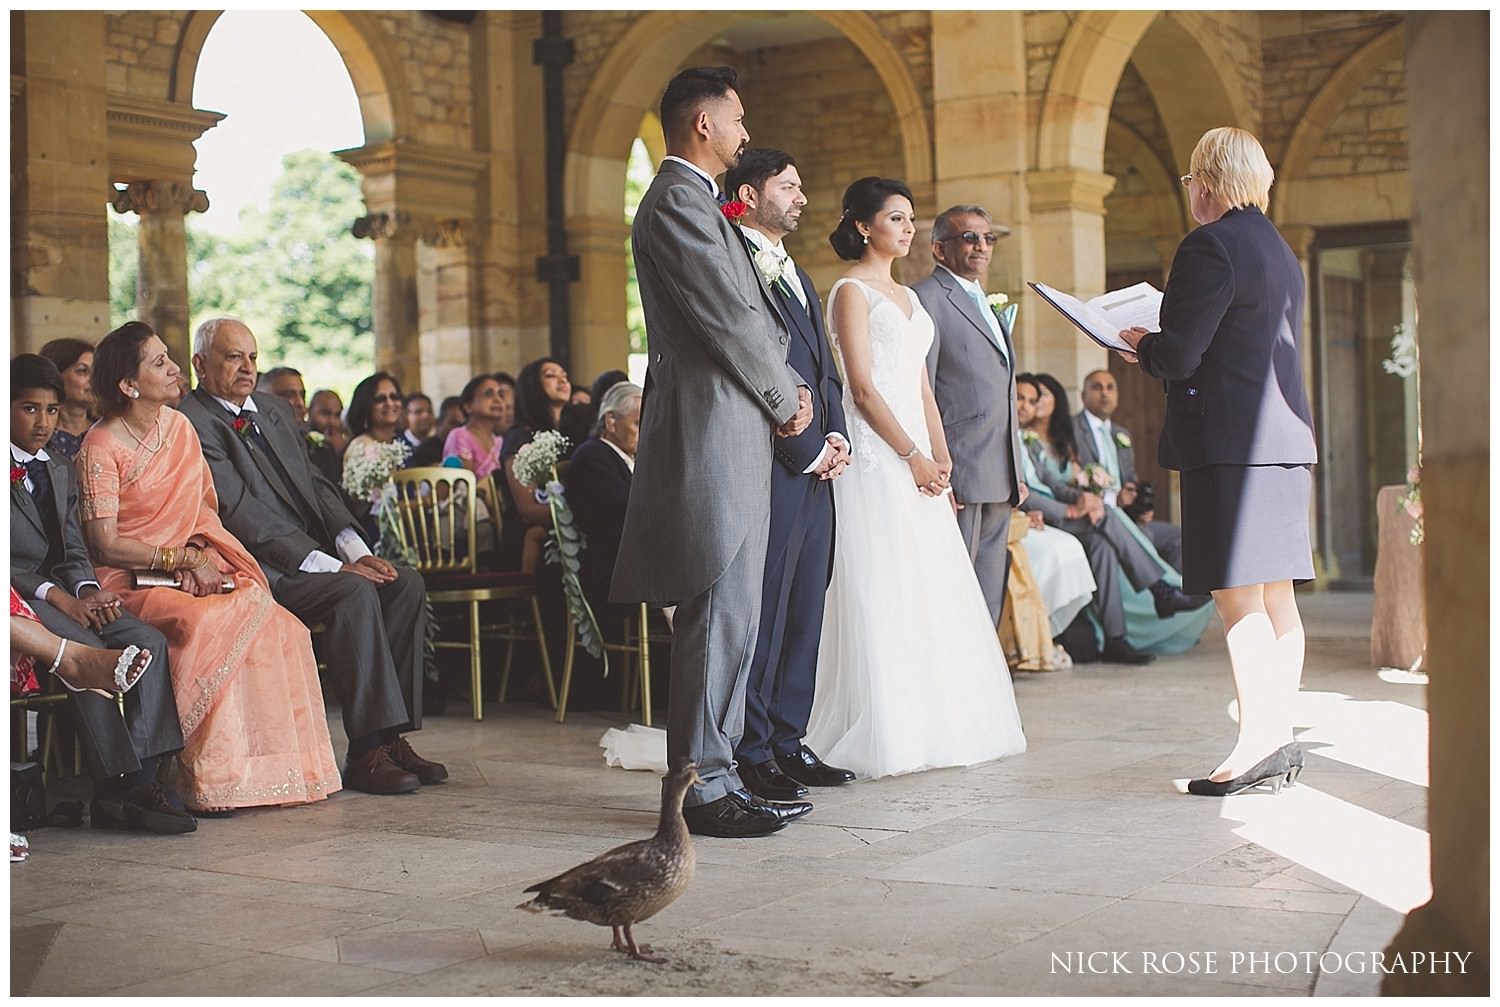  Duck watching the wedding ceremony at Hever Castle 